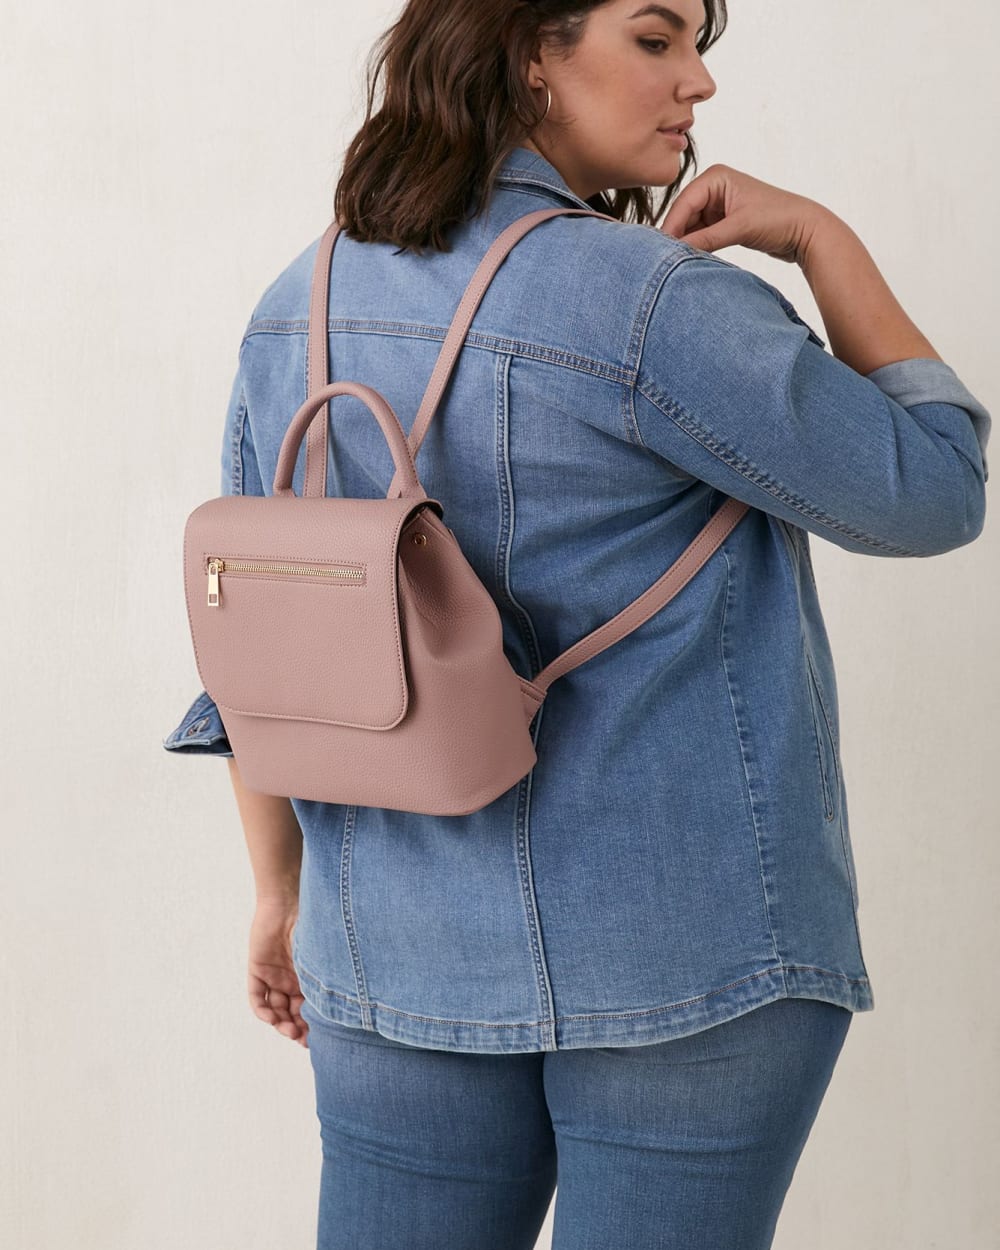 Back Pack With Flap Closure | Penningtons